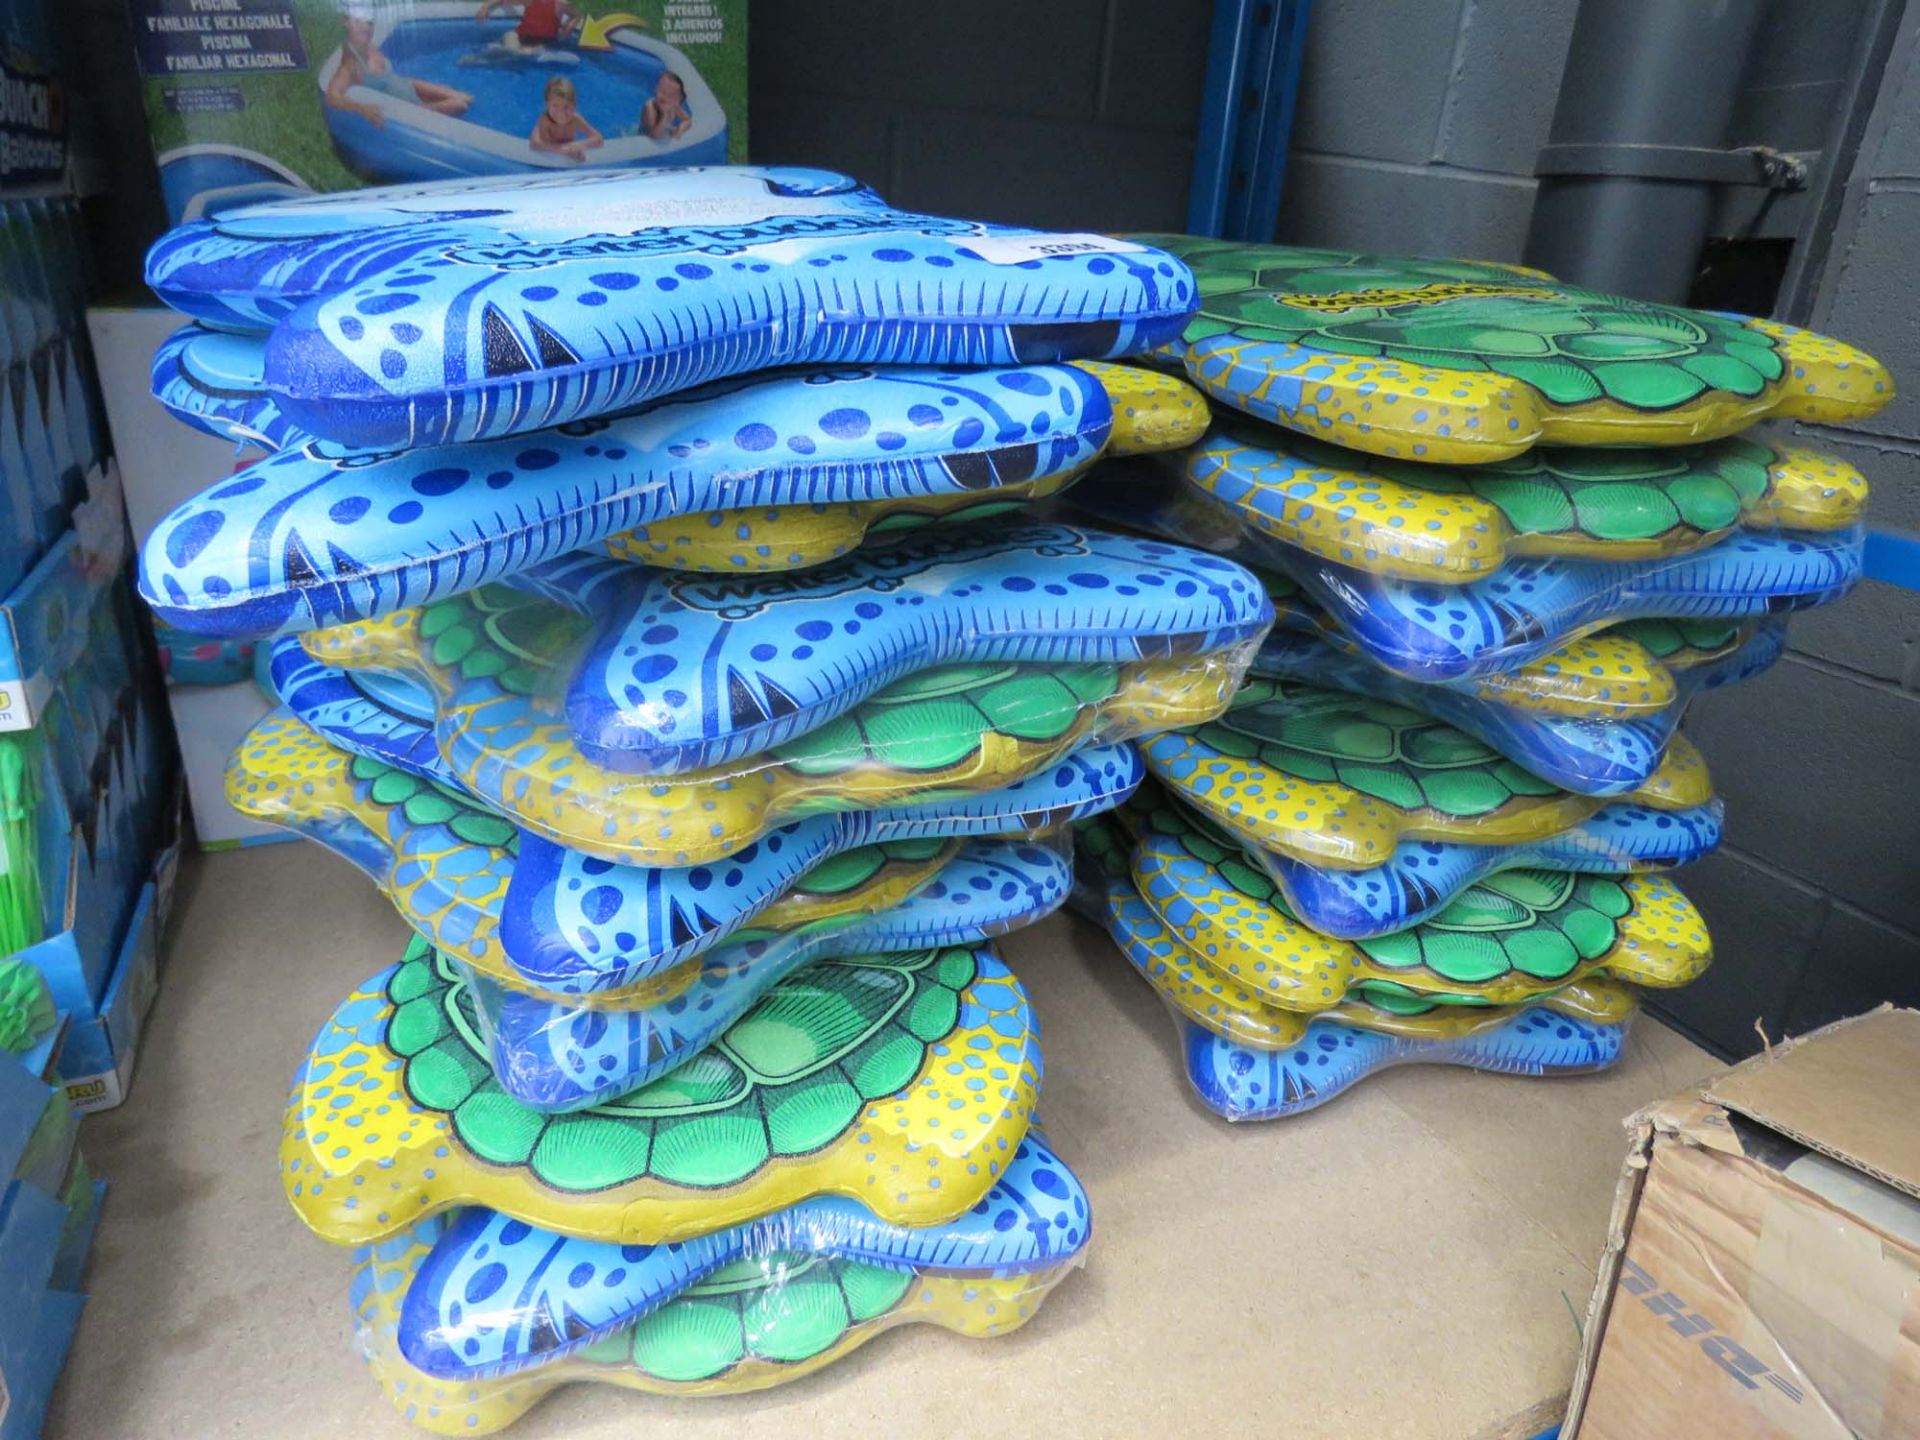 Large quantity of children's small paddle boards